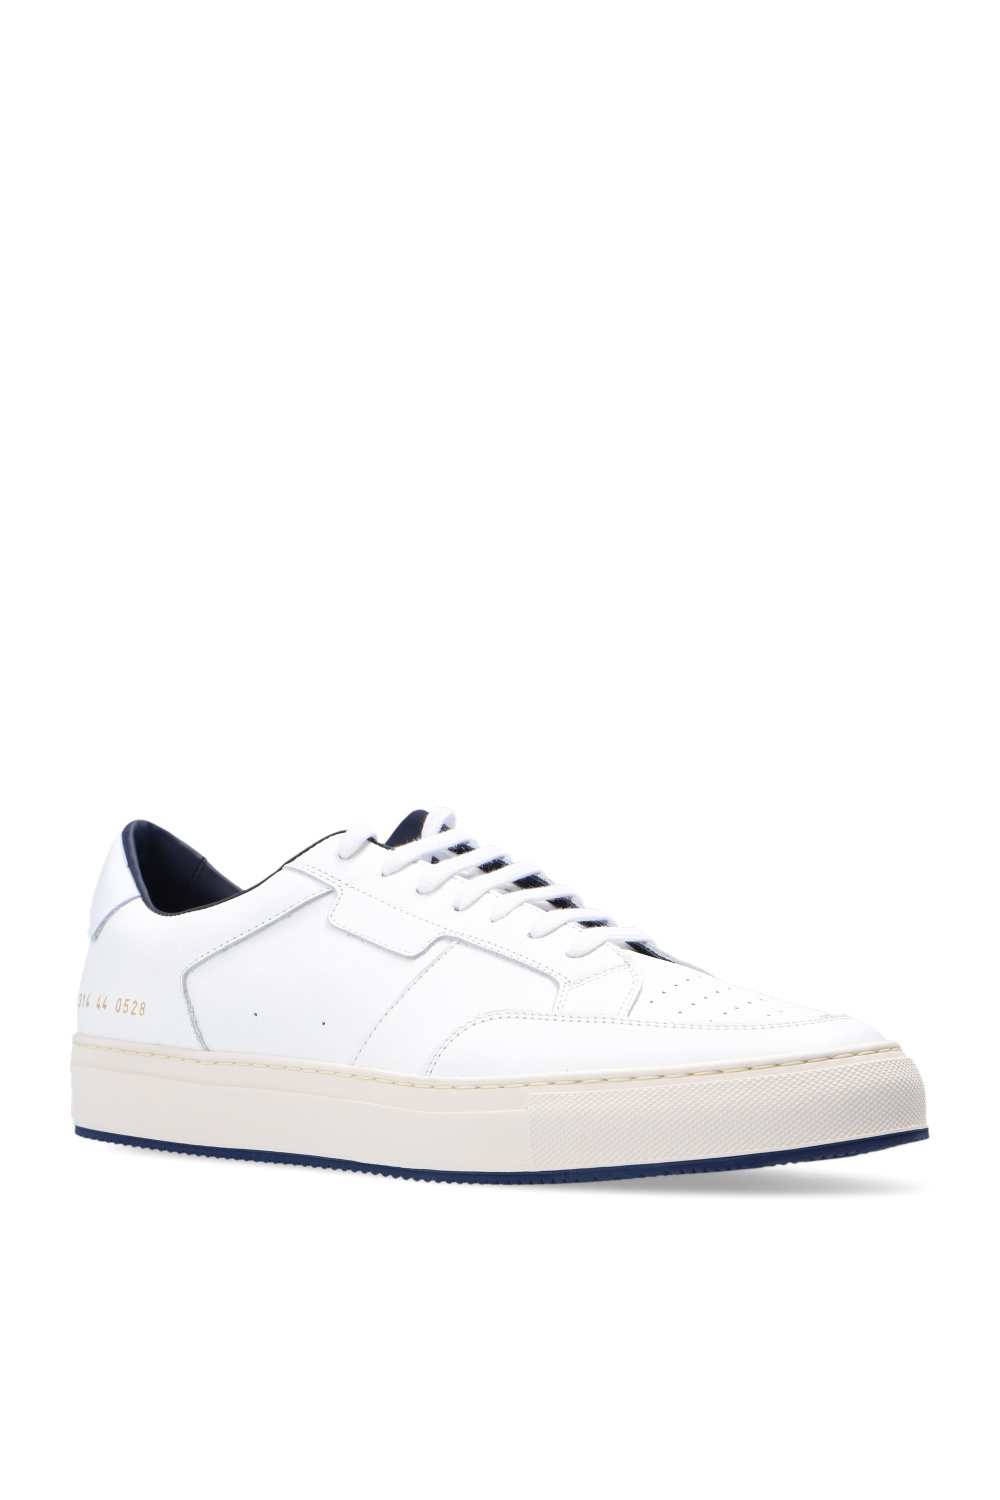 Common Projects ‘Tennis’ sneakers